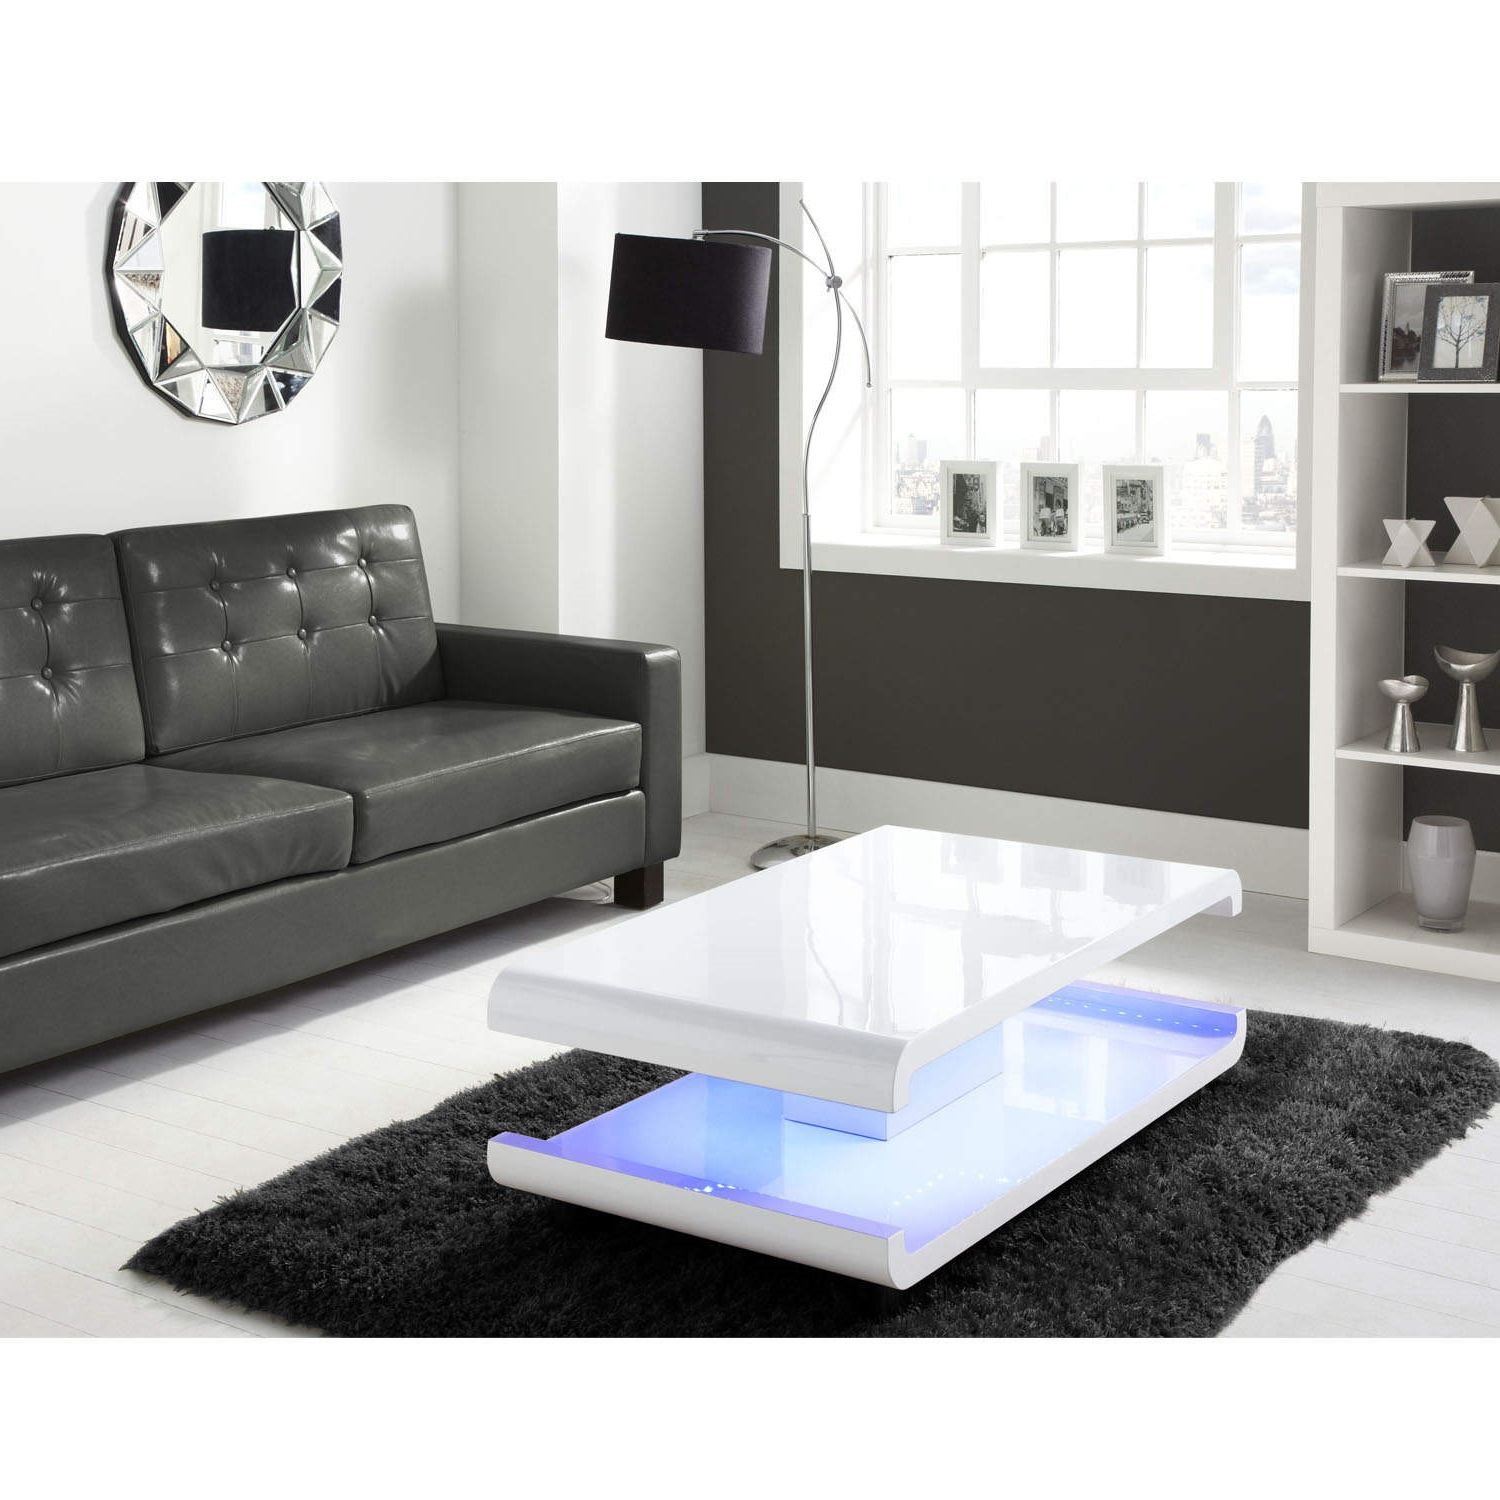 Tiffany White High Gloss Coffee Table With Led Lighting | Furniture123 Throughout Coffee Tables With Led Lights (View 18 of 20)